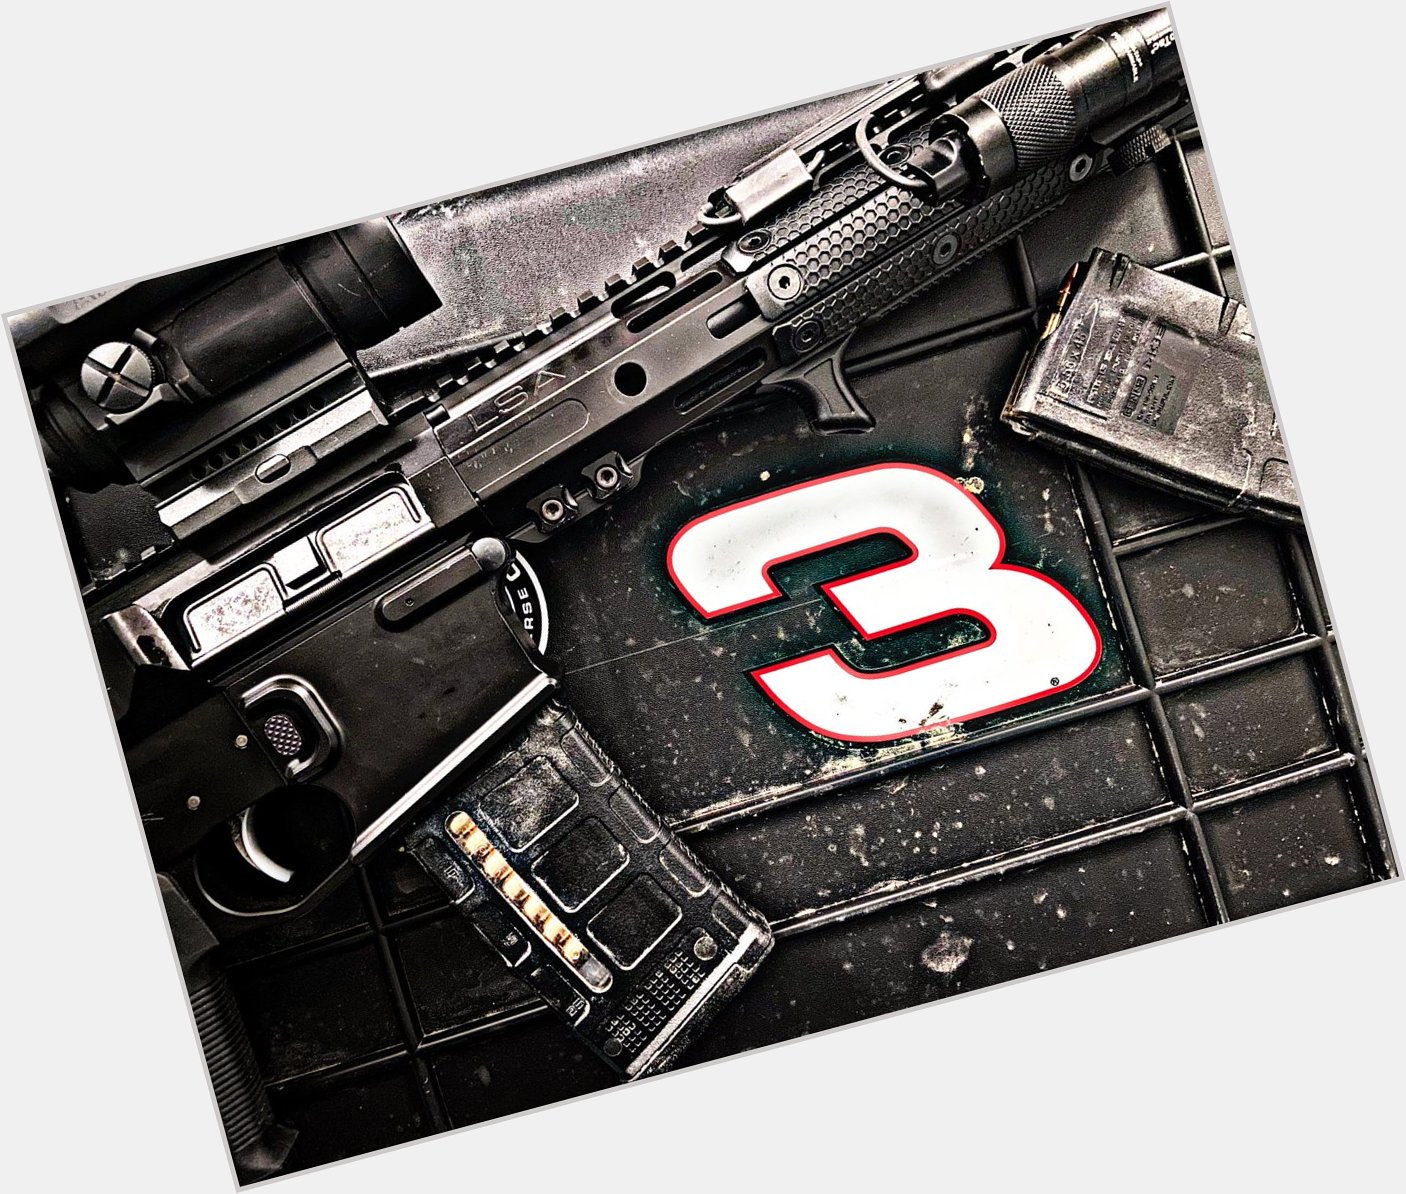 Happy birthday to the Intimidator. 

Be advised, this remains a Dale Earnhardt respecter zone. 